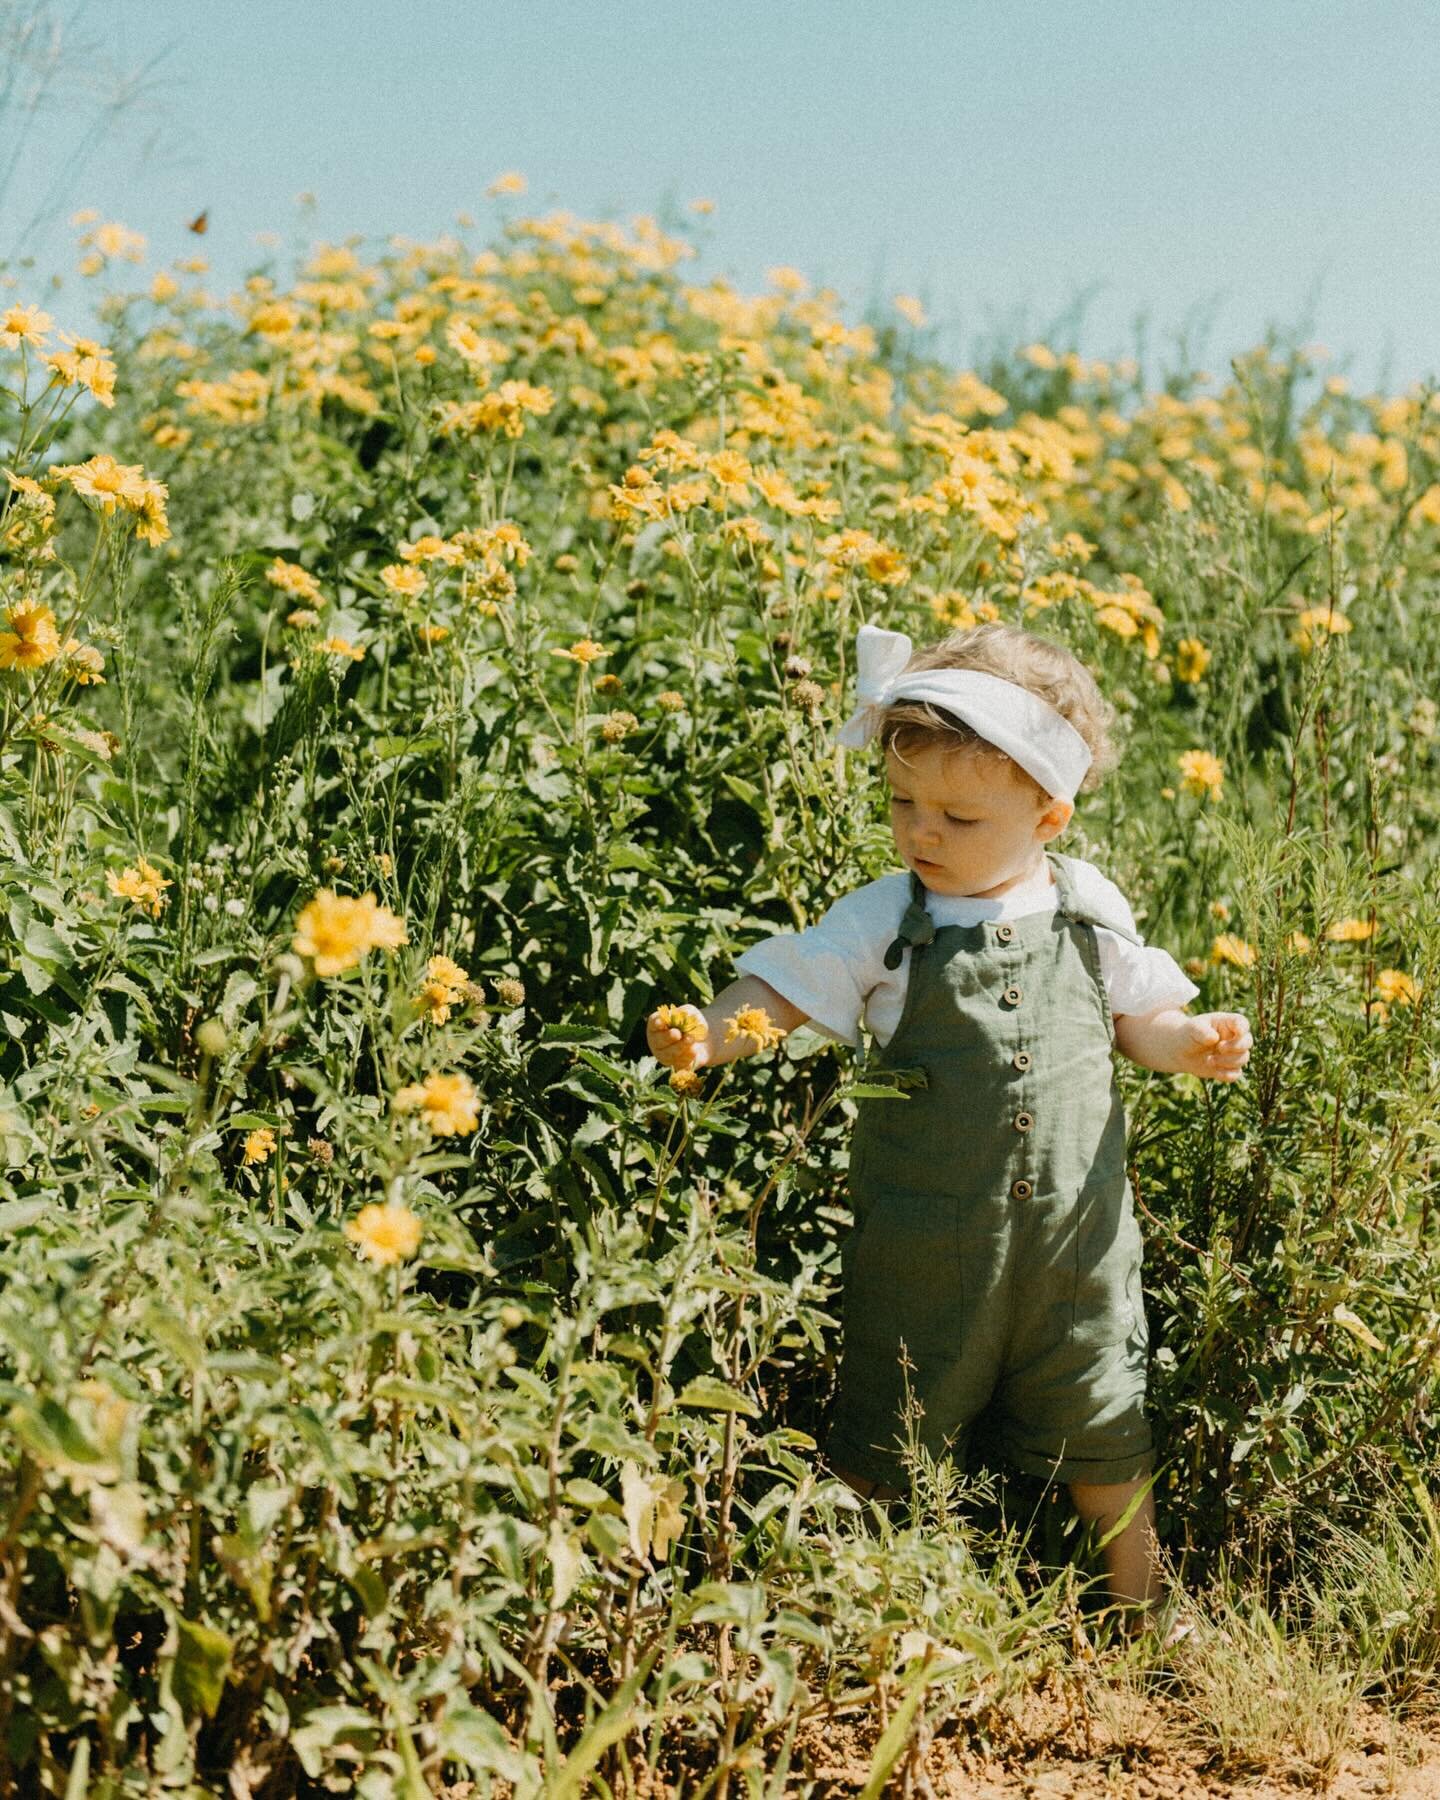 Always stop and smell the flowers first.
💛💛💛
Photo credit: @ezilebez